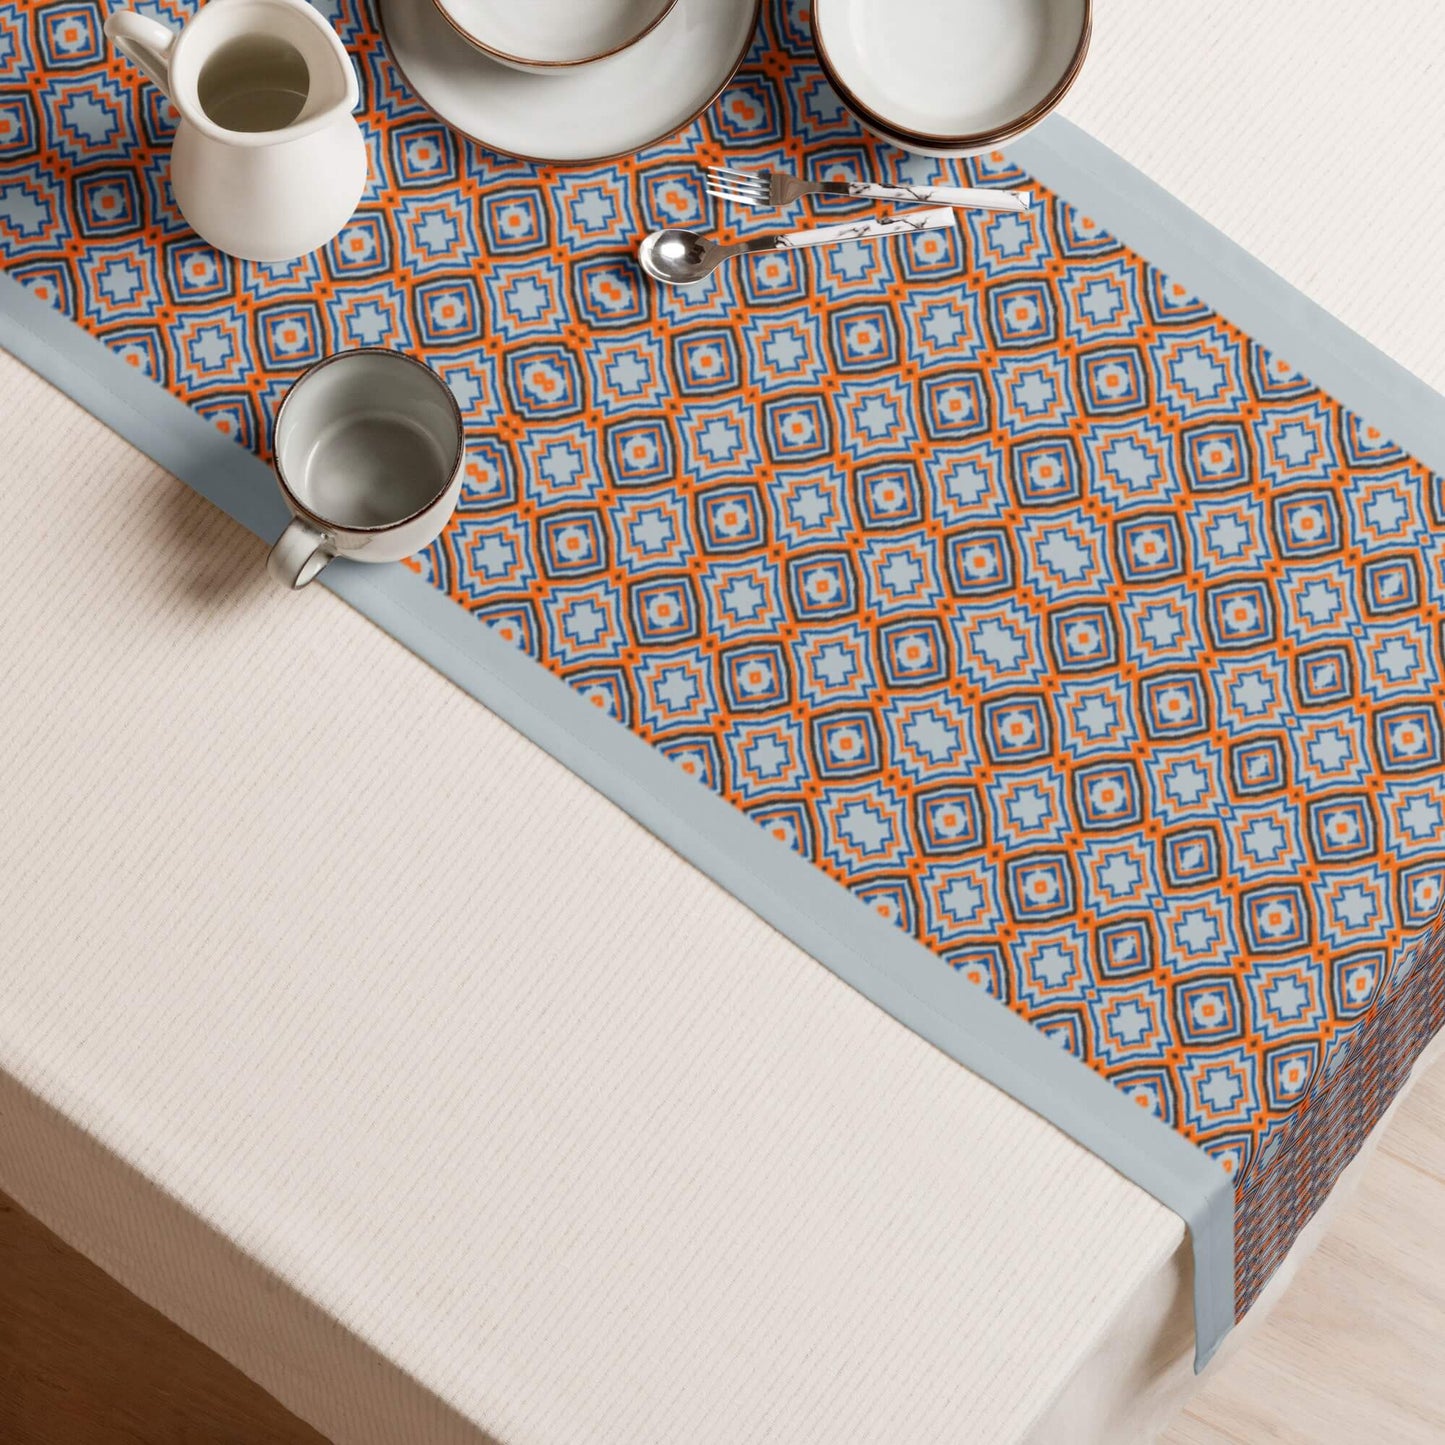 Table runner for coffee table decoration